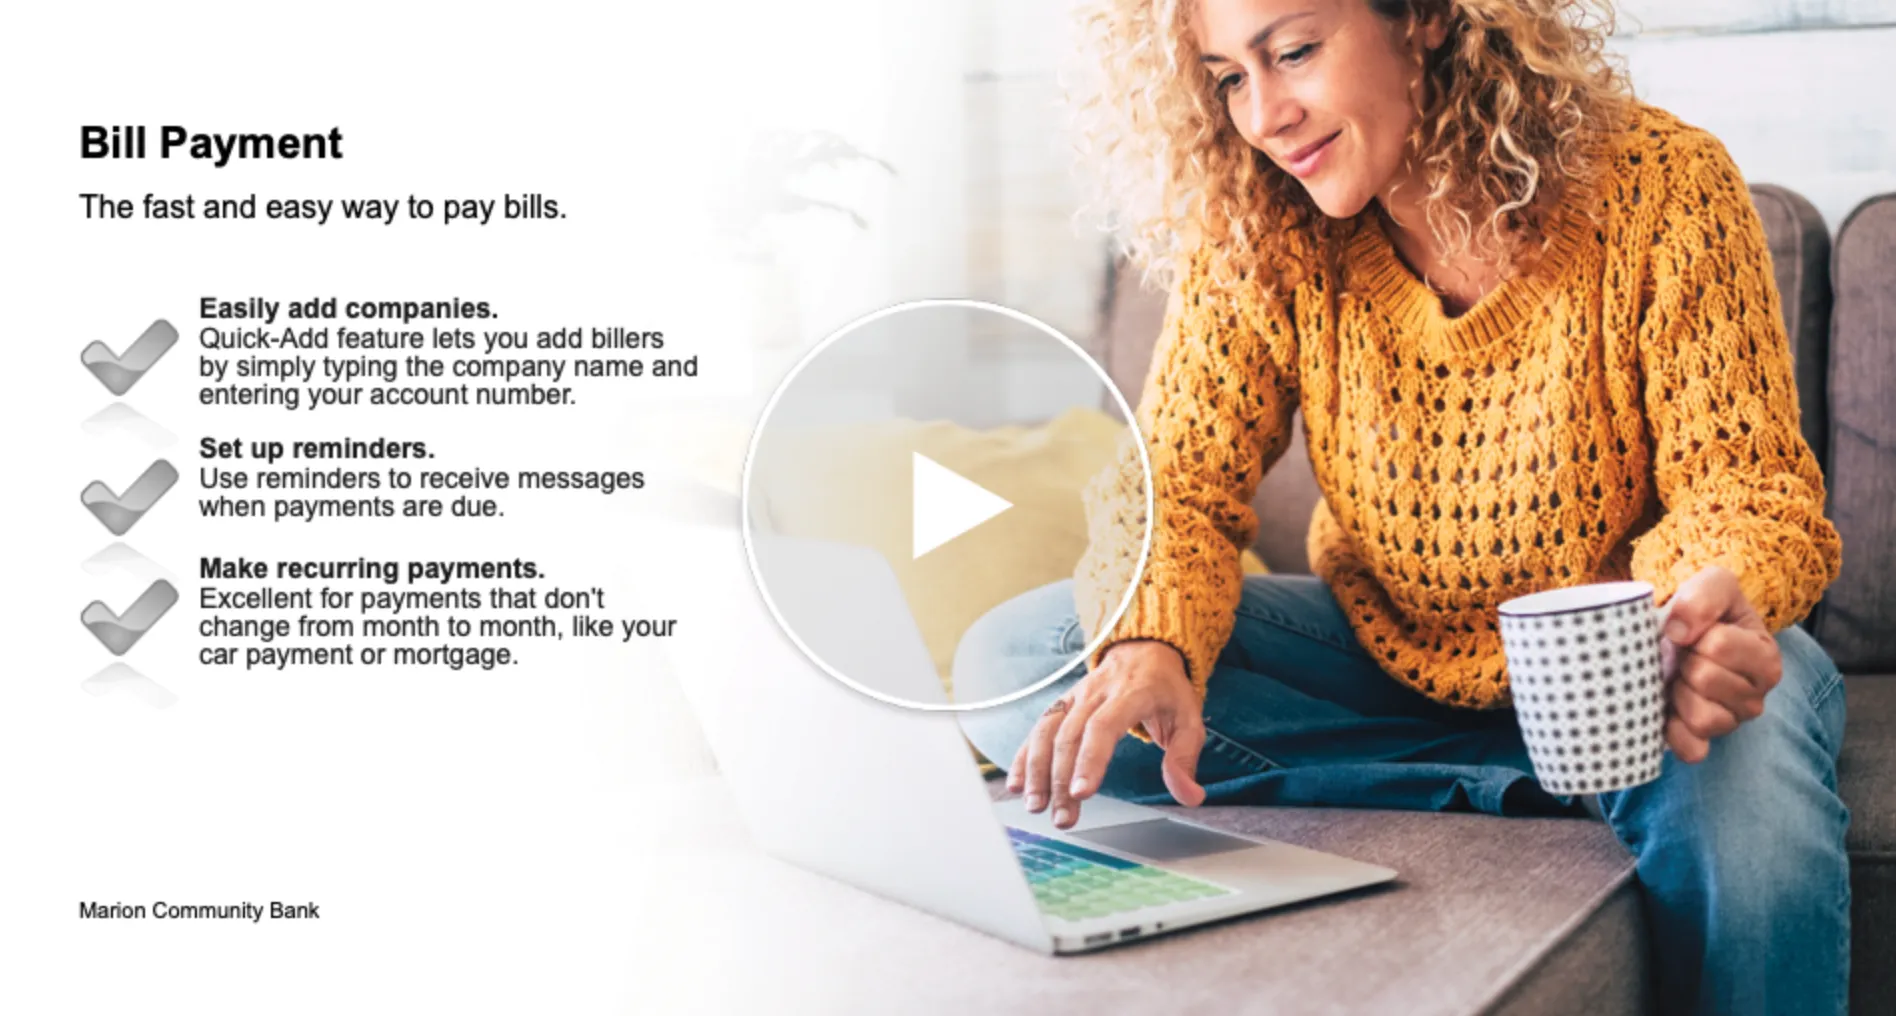 Video link leading to a bill payment guide video.